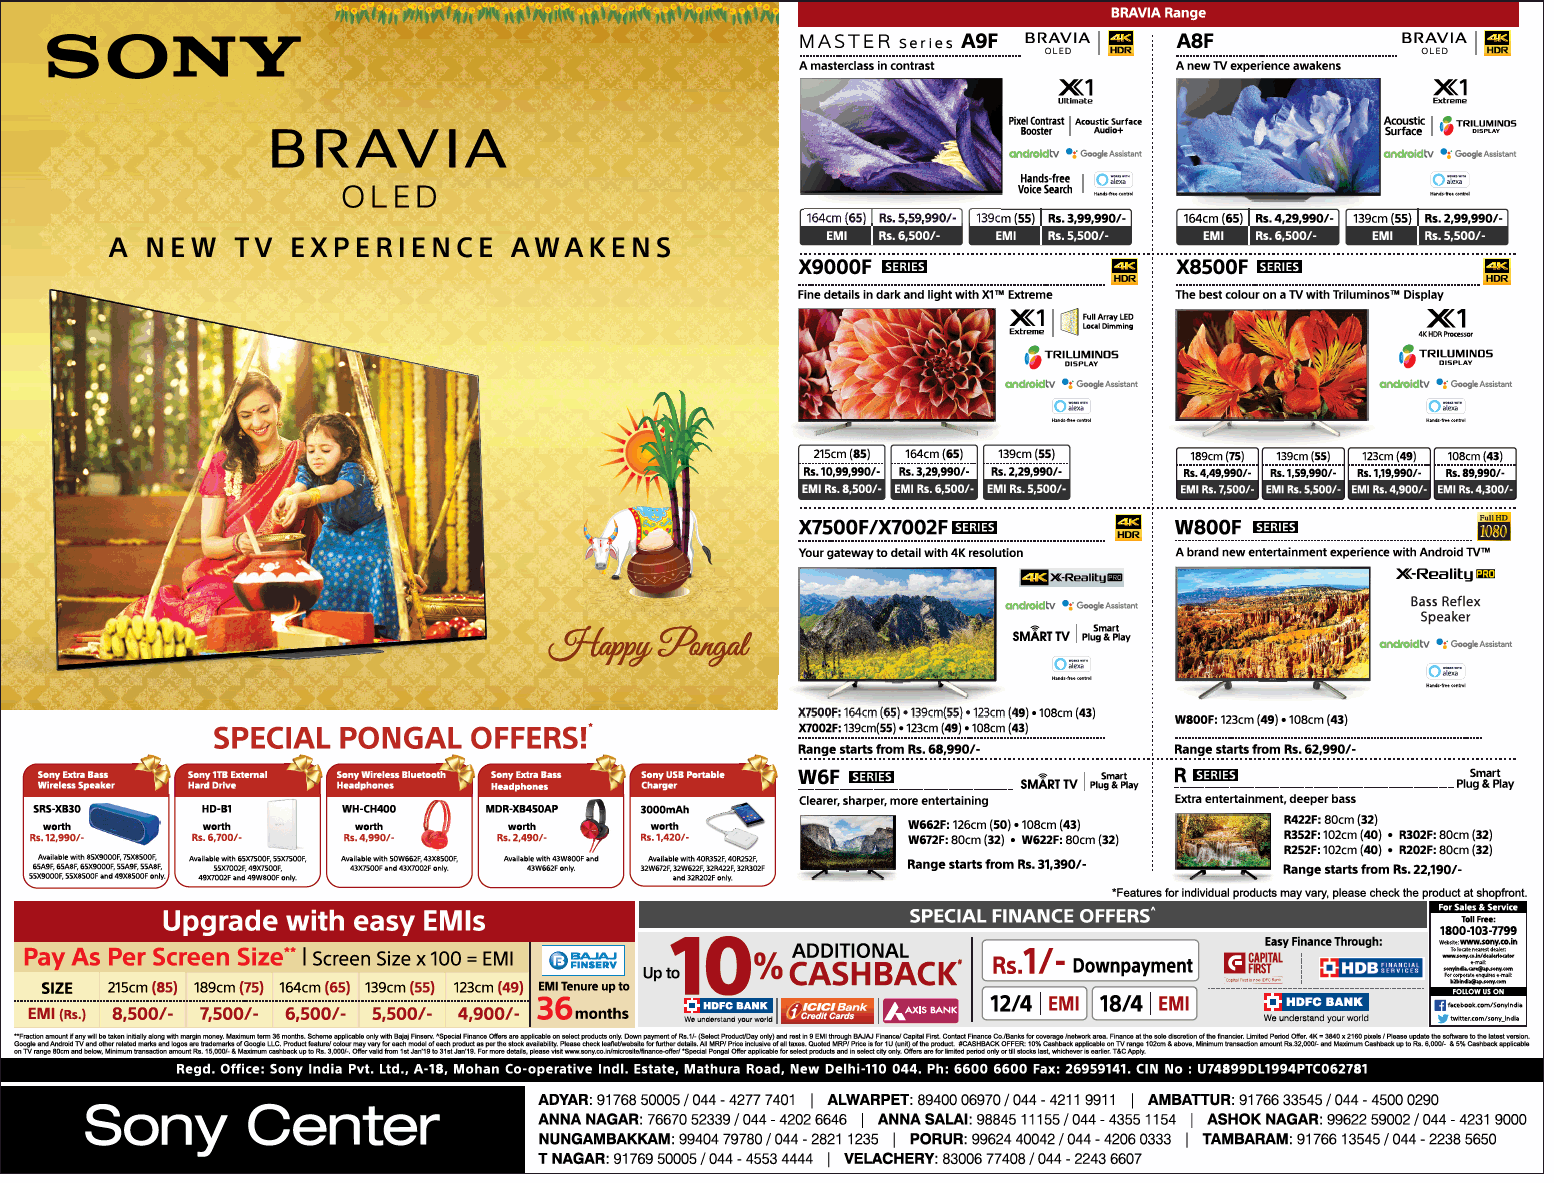 sony-bravia-oled-a-new-tv-experience-awakens-ad-times-of-india-chennai-06-01-2019.png